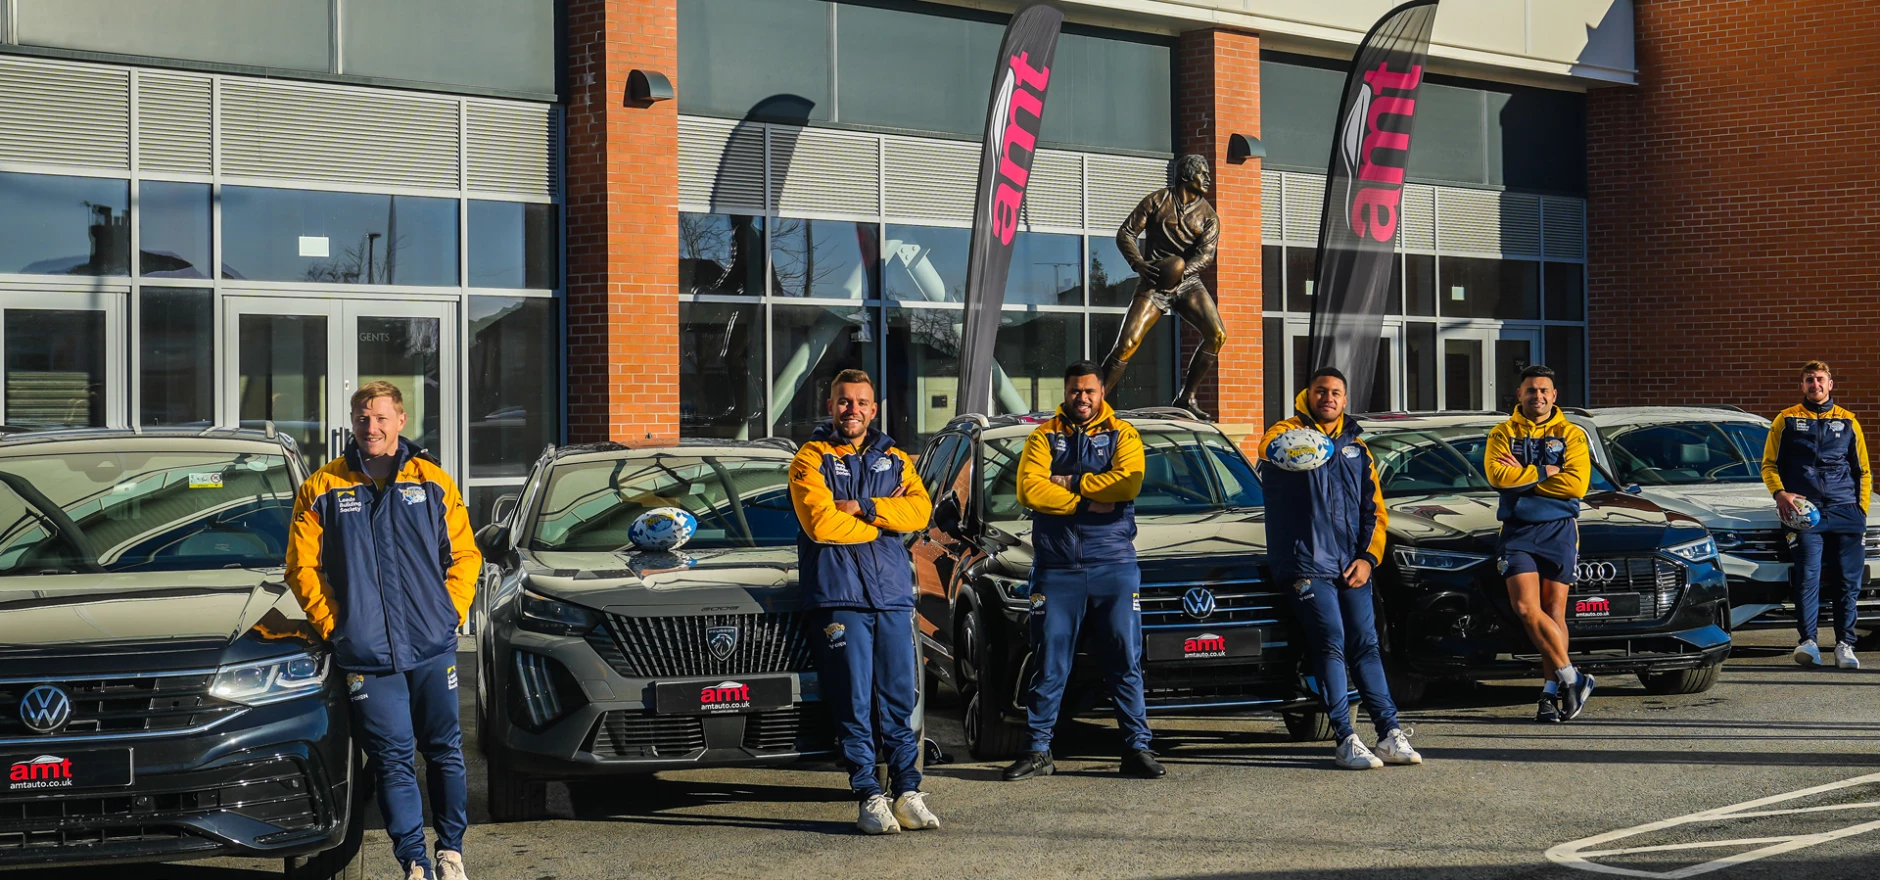 Leeds Rhinos Players and AMT Auto Cars